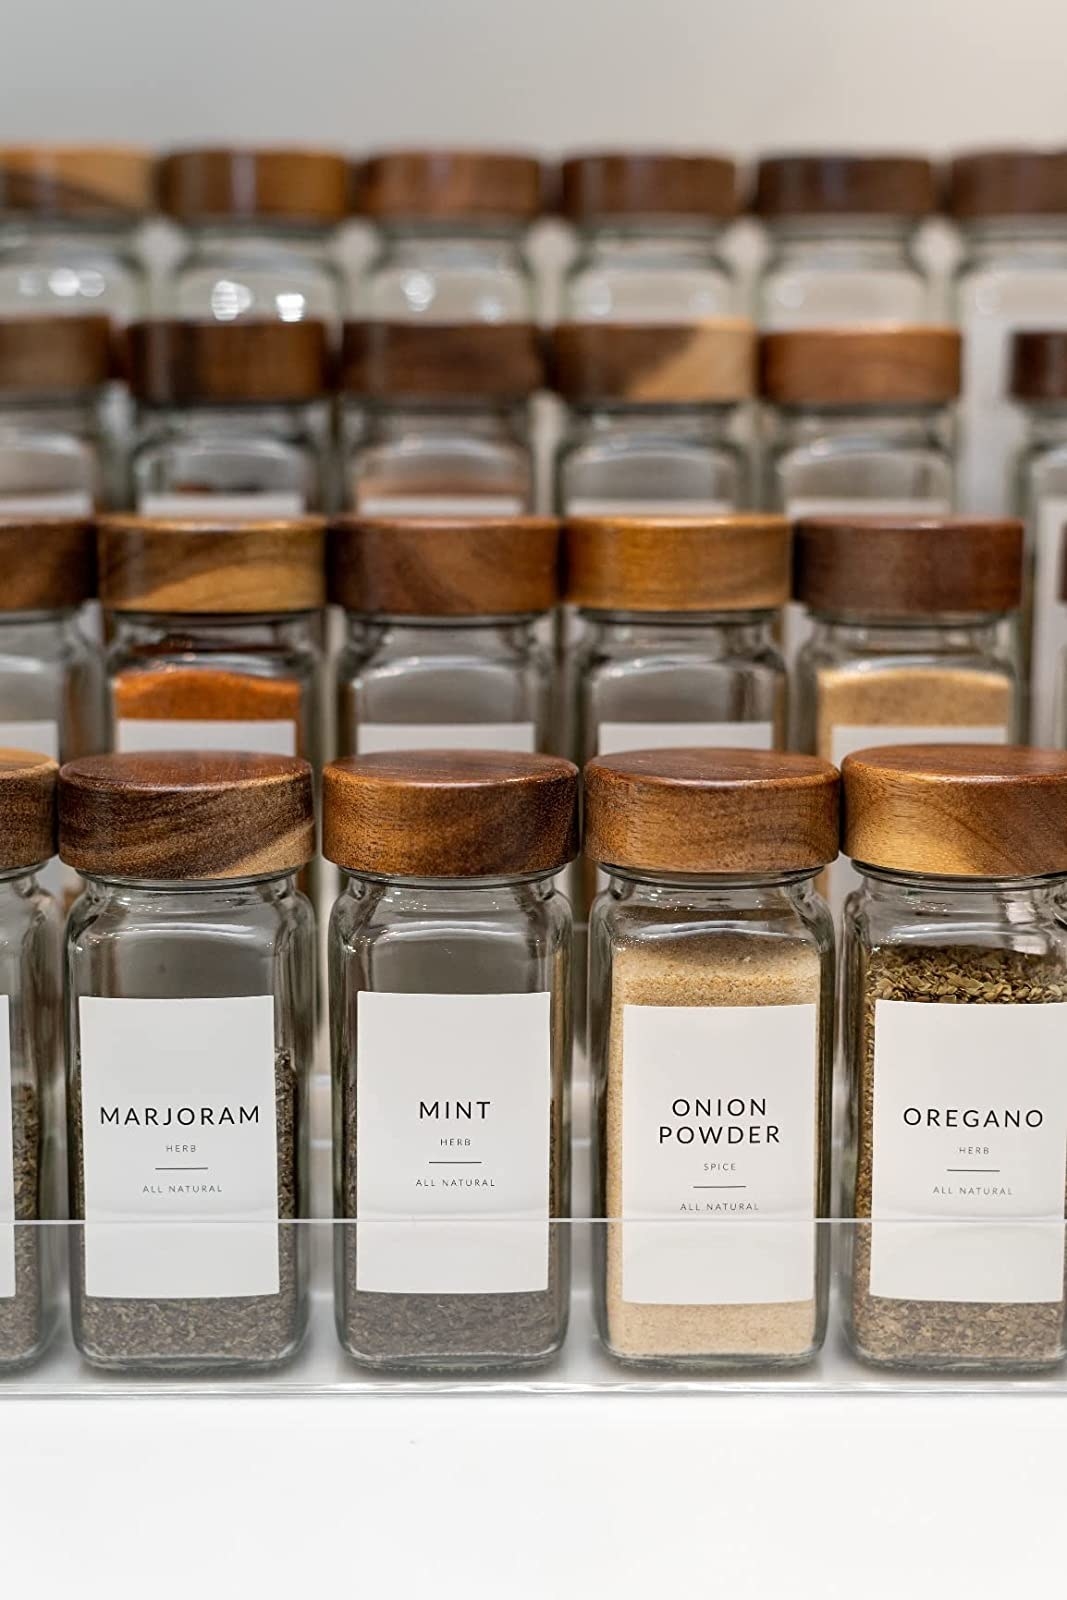 Reviewer image of spice jars with labels